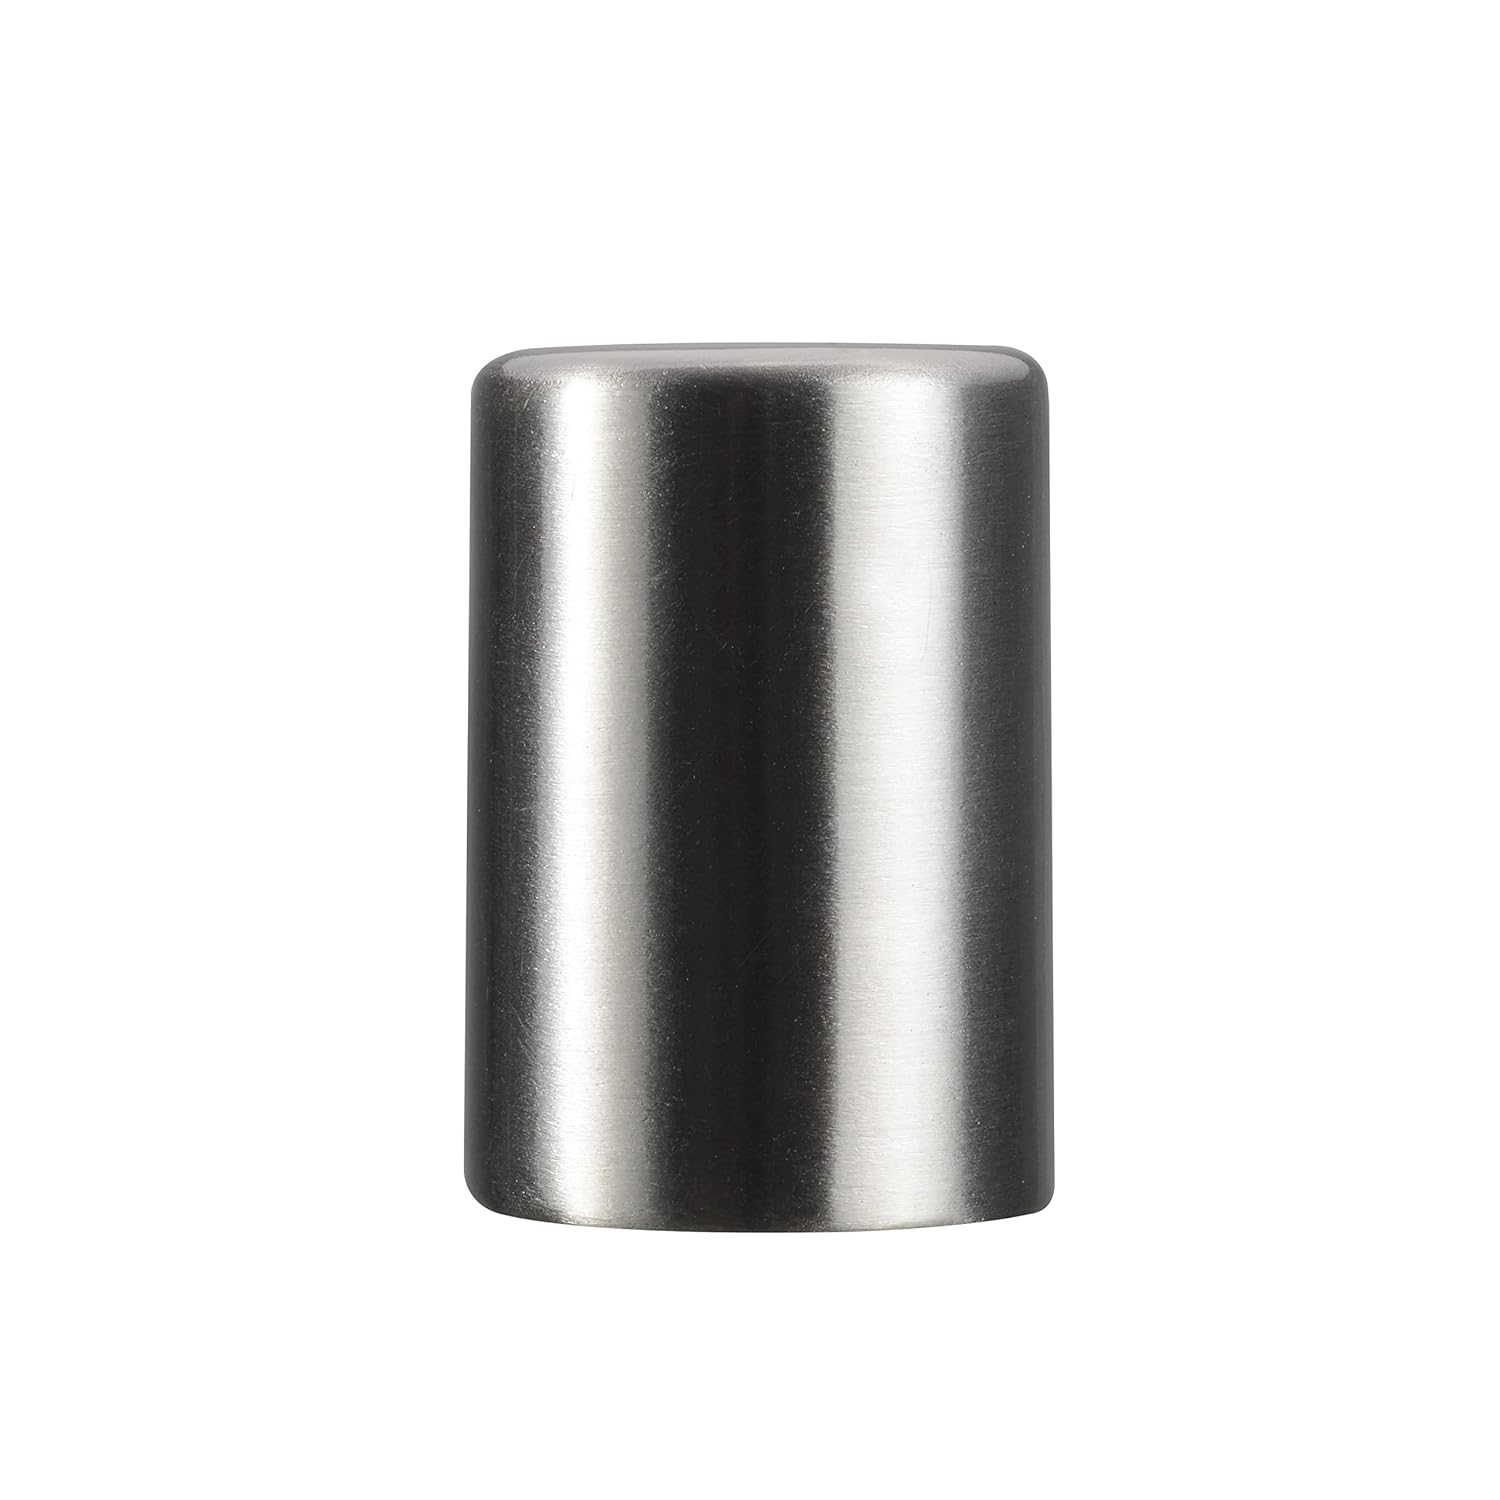 Great Choice Products Brushed Nickel 24043-09-2, Finial For Lamp Shade Finish, 1-1/4" Height, 2Pcs/Pack